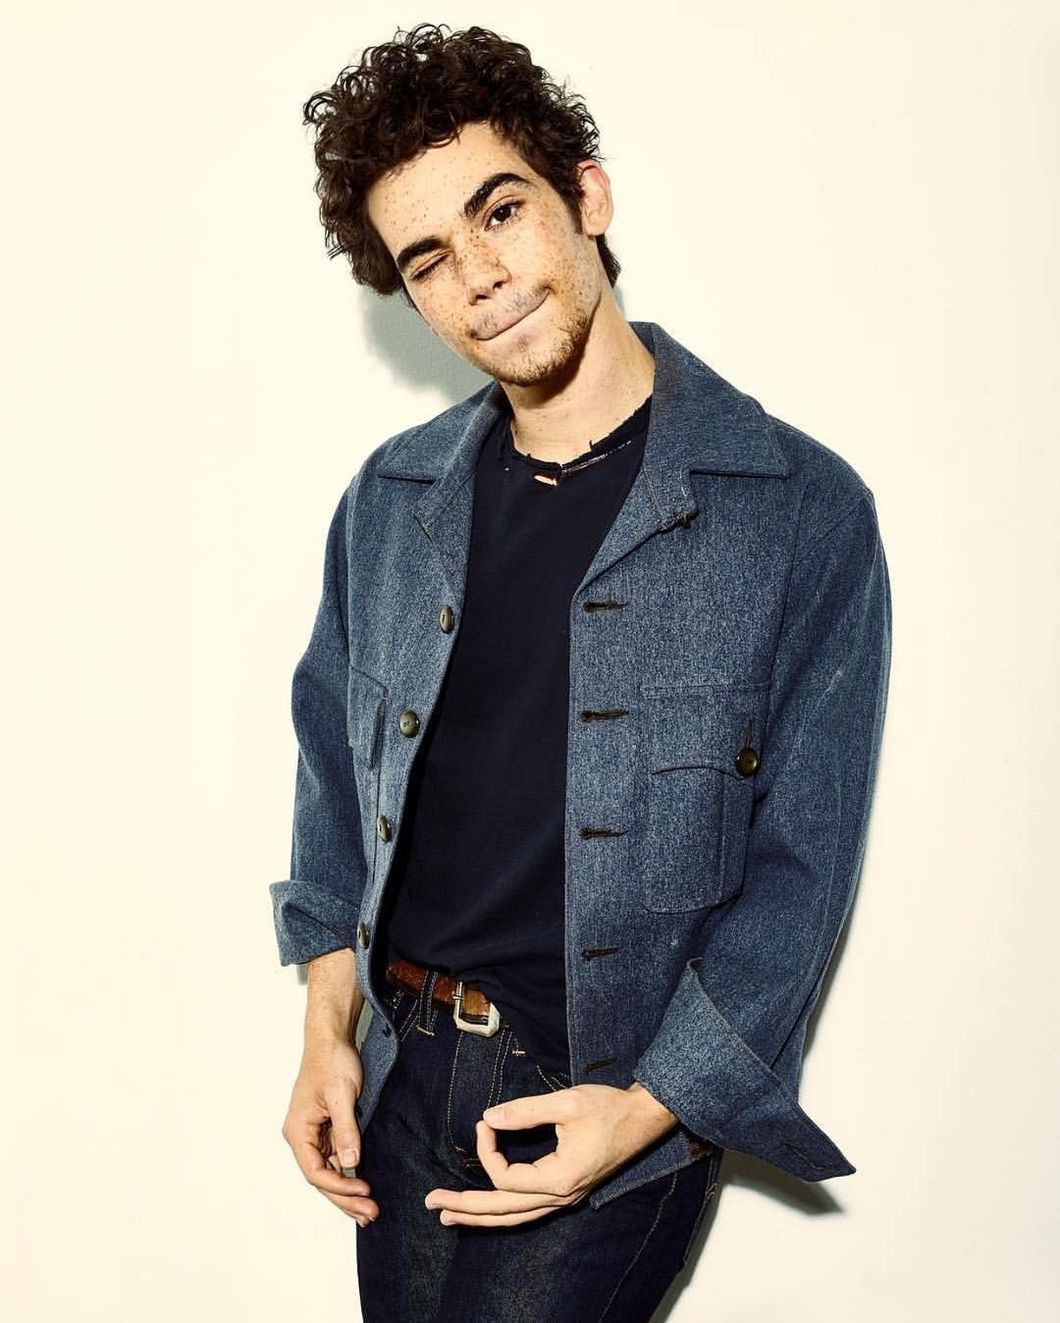 Remembering Cameron Boyce And Learning To Live A Meaningful Life